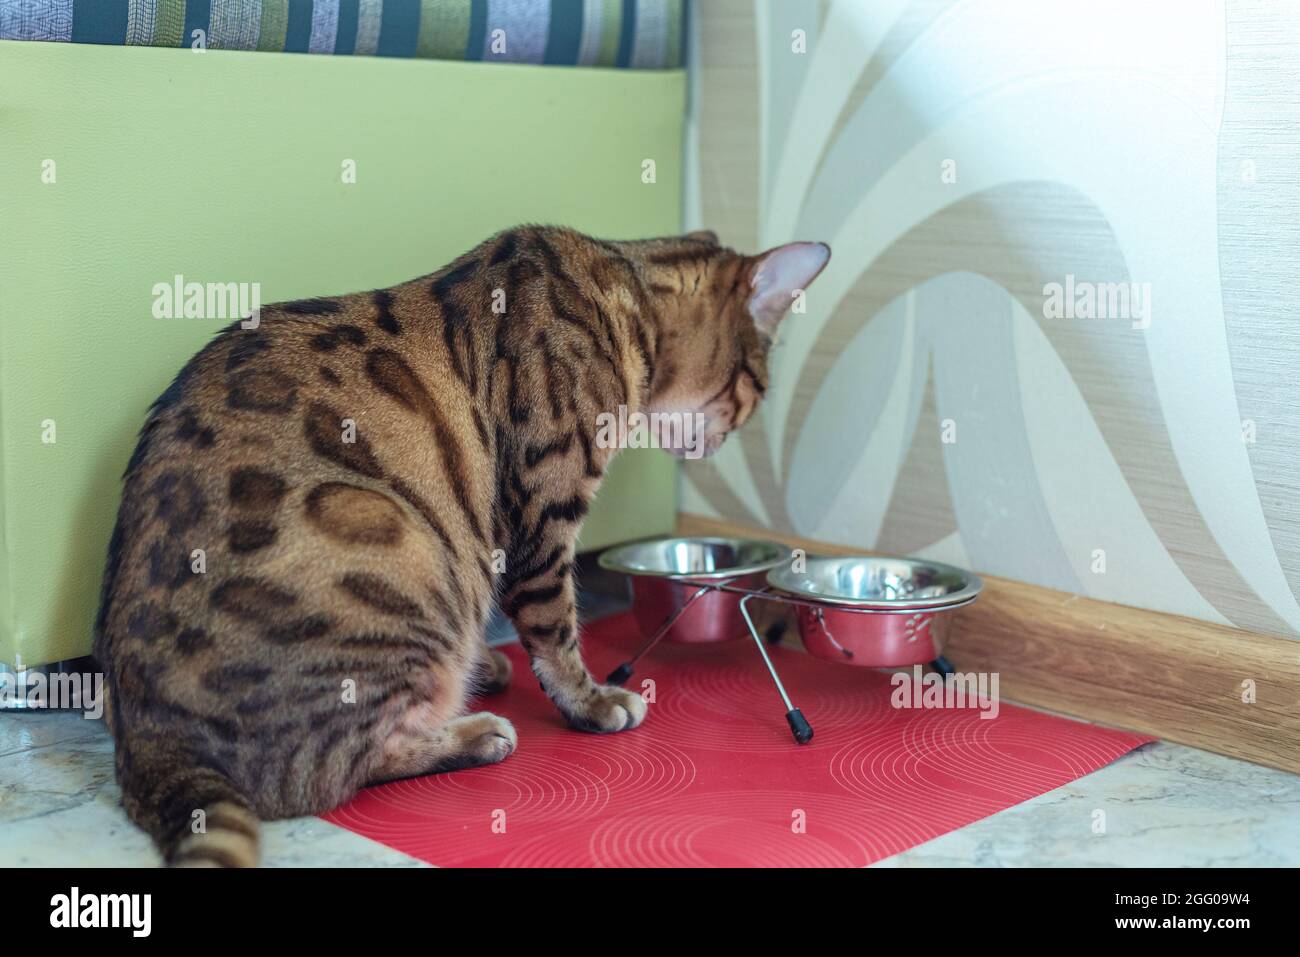 The cat is waiting for food. Sits at home by his bowl. Stock Photo